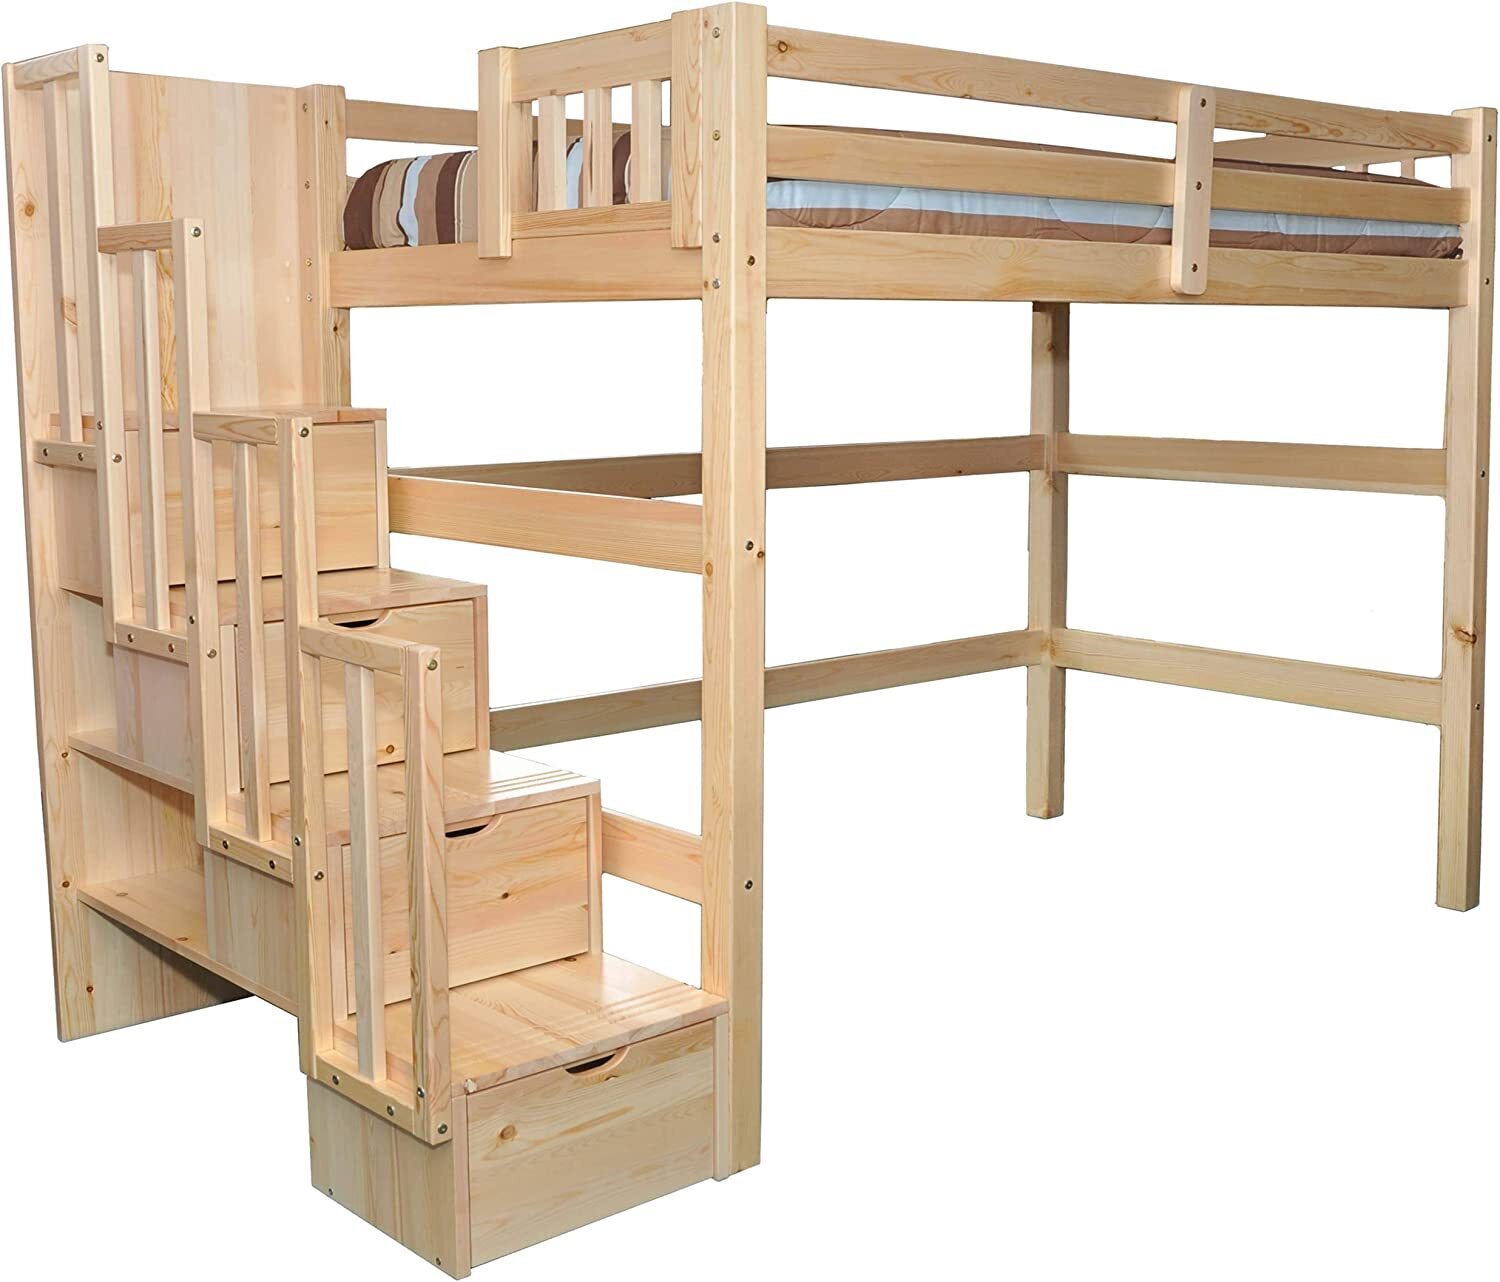 Cottage Style High Bed With Storage Underneath